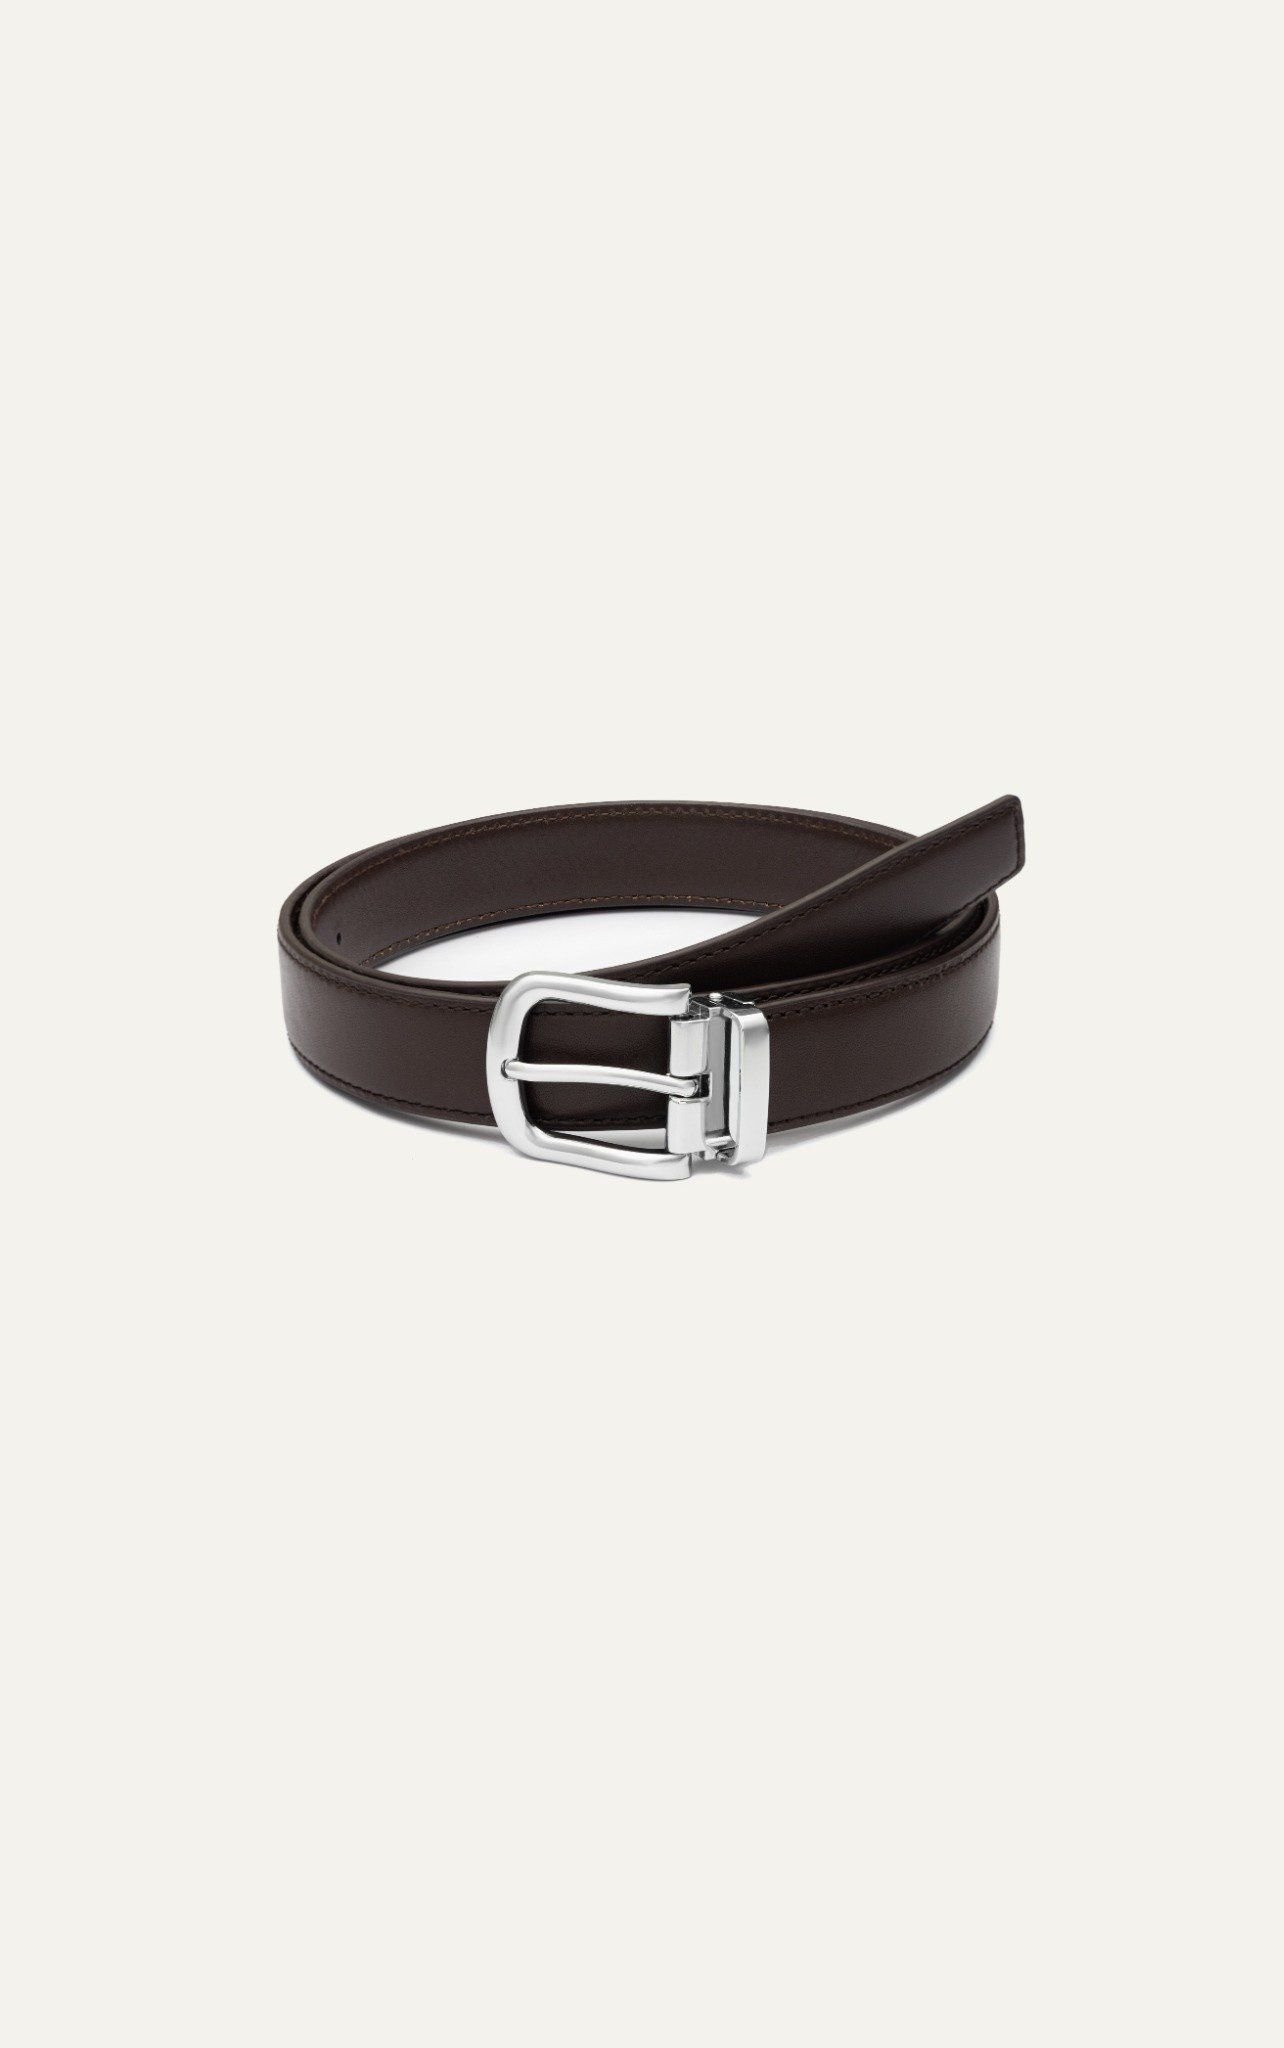  AG LEATHER BELTS BROWN - SQUARE HEAD SILVER 